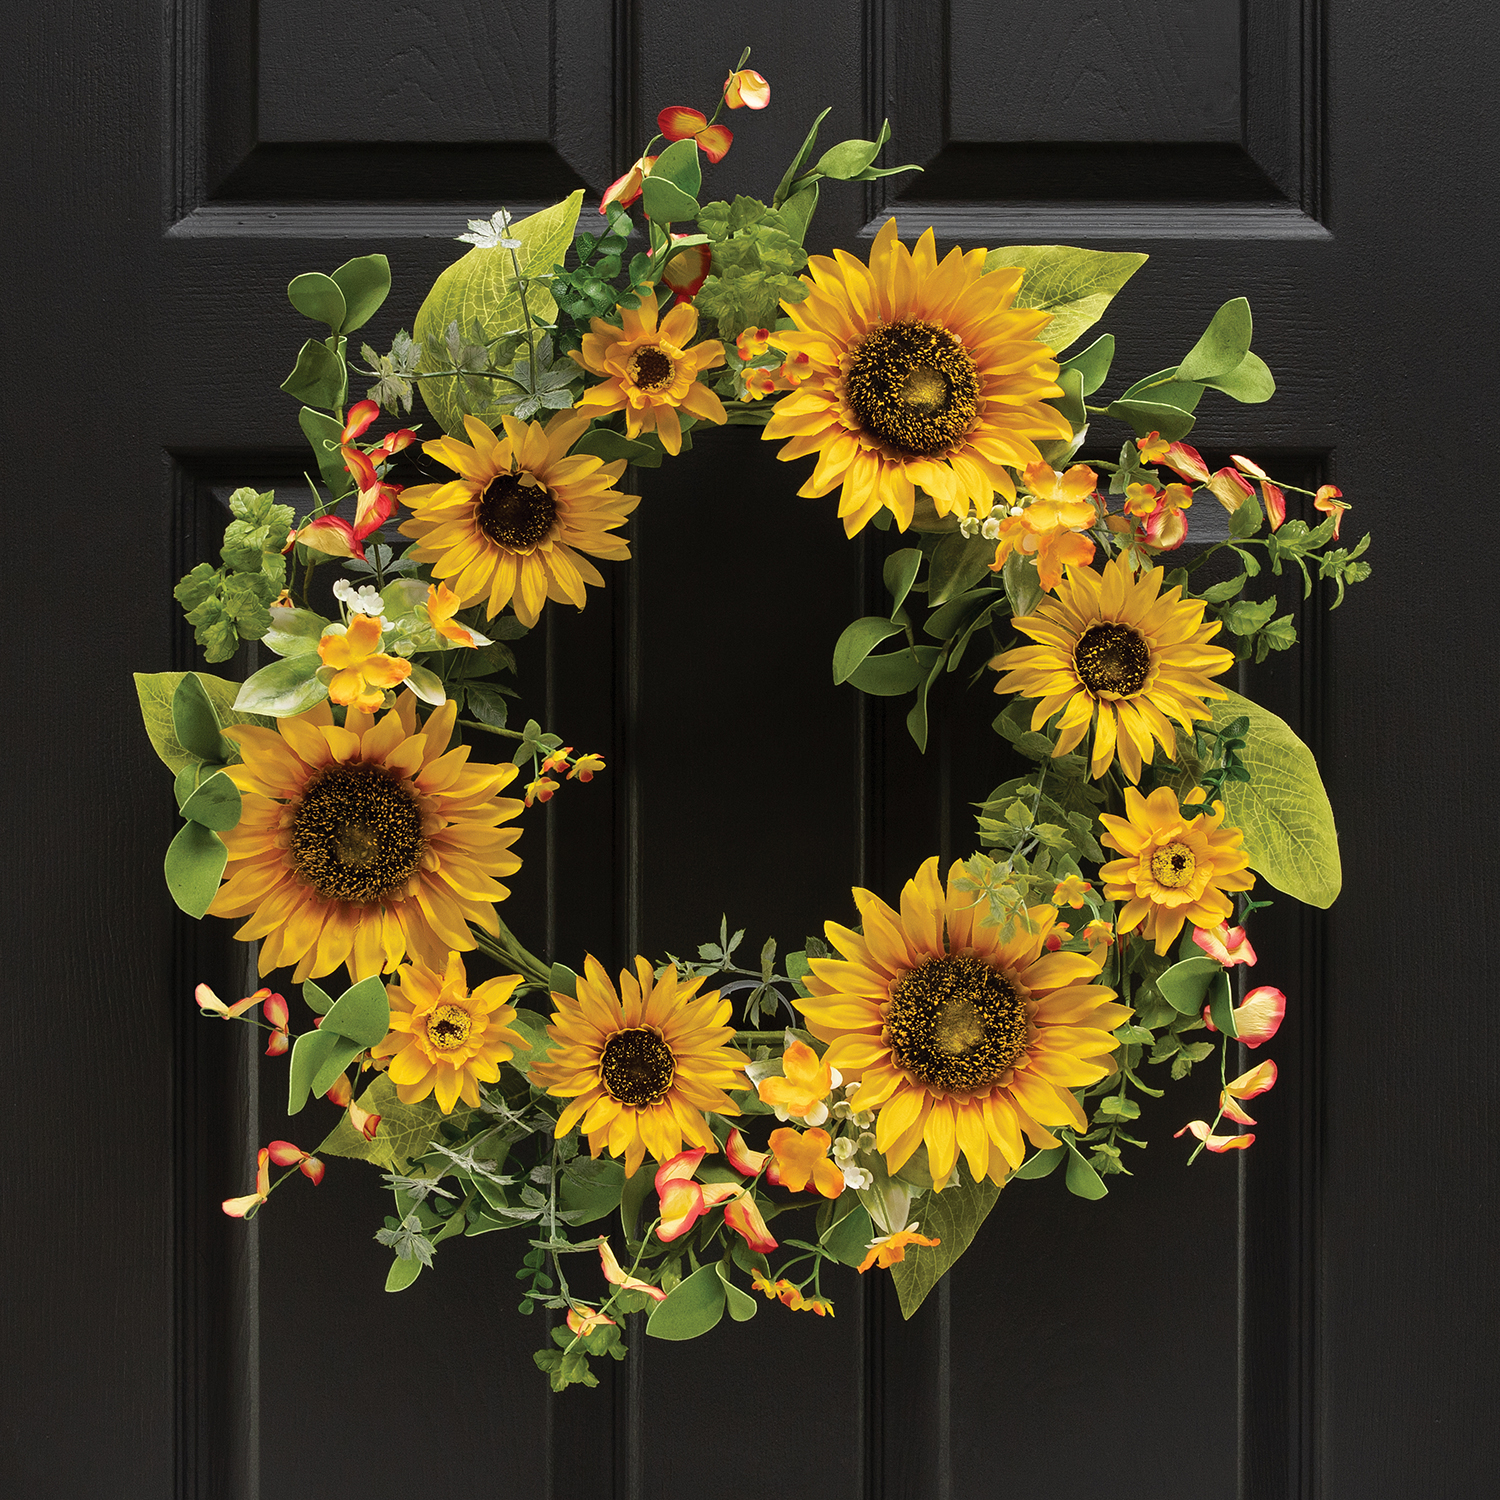 WREATH SUNFLOWER/DAISY 22IN (INNER RING 11IN) - Click Image to Close